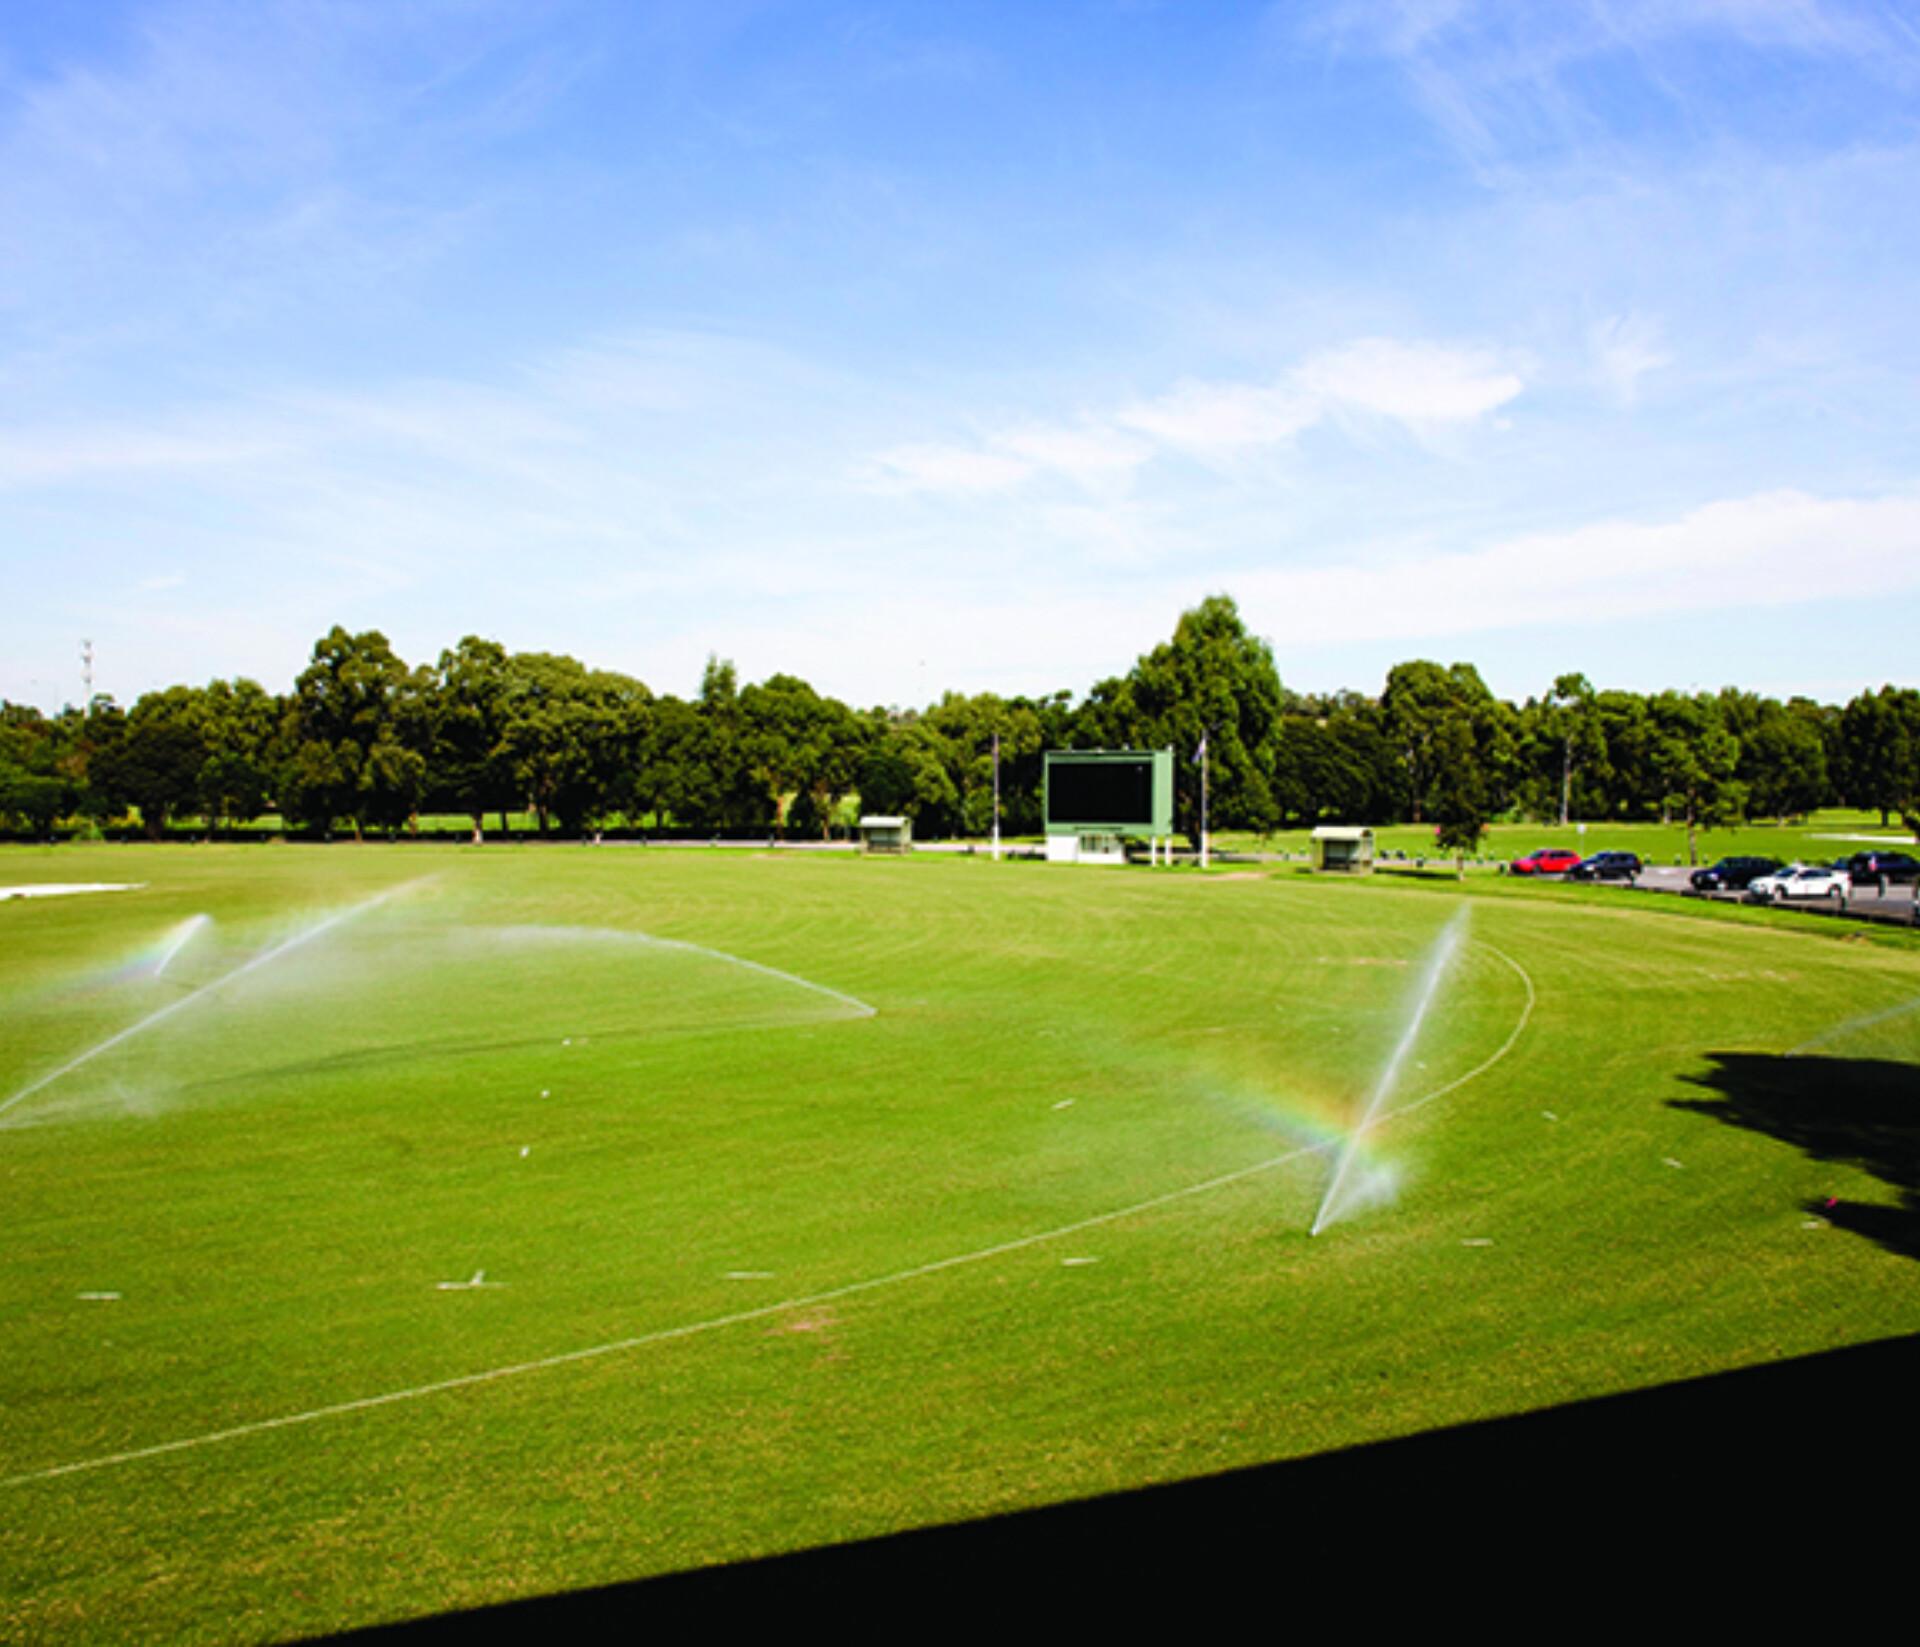 <h2>Bulleen Sports Complex</h2>
<h3>Our Bulleen Sports Complex hosts Physical Education classes, sport training, APS/AGSV competitions, House sport events and community events.</h3>